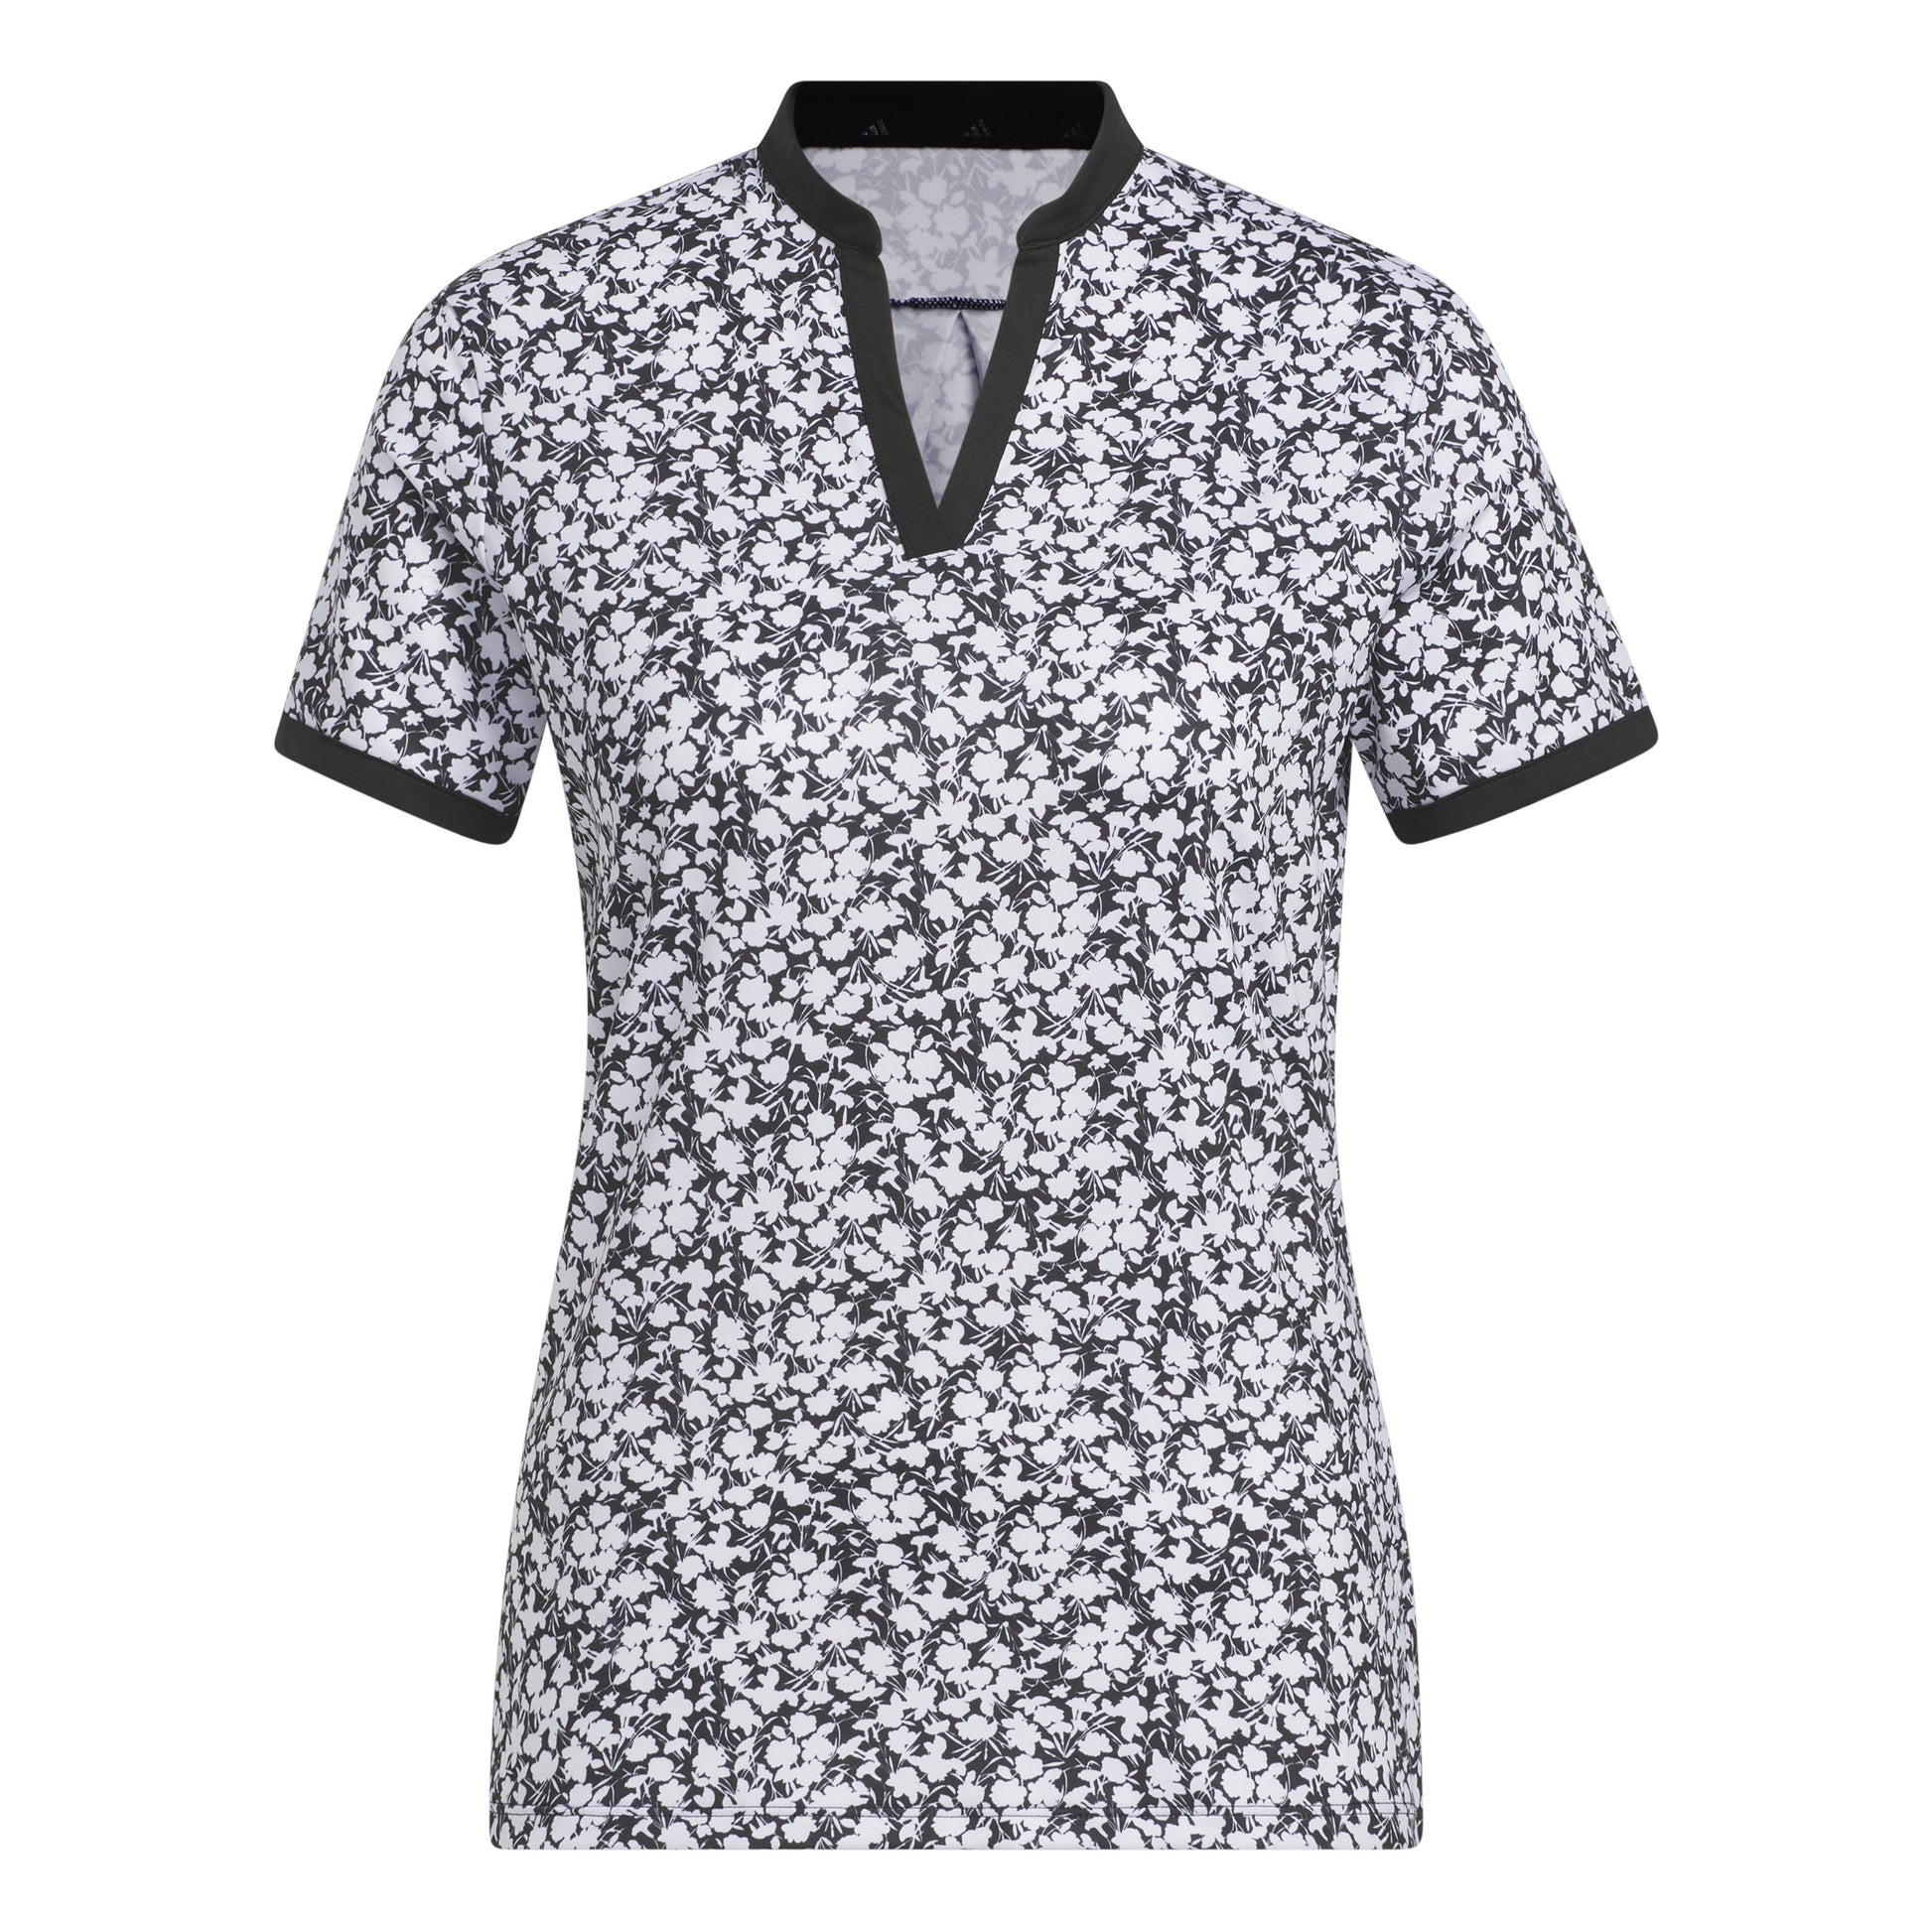 adidas Ladies Short Sleeve Golf Polo with Black & White Floral Print